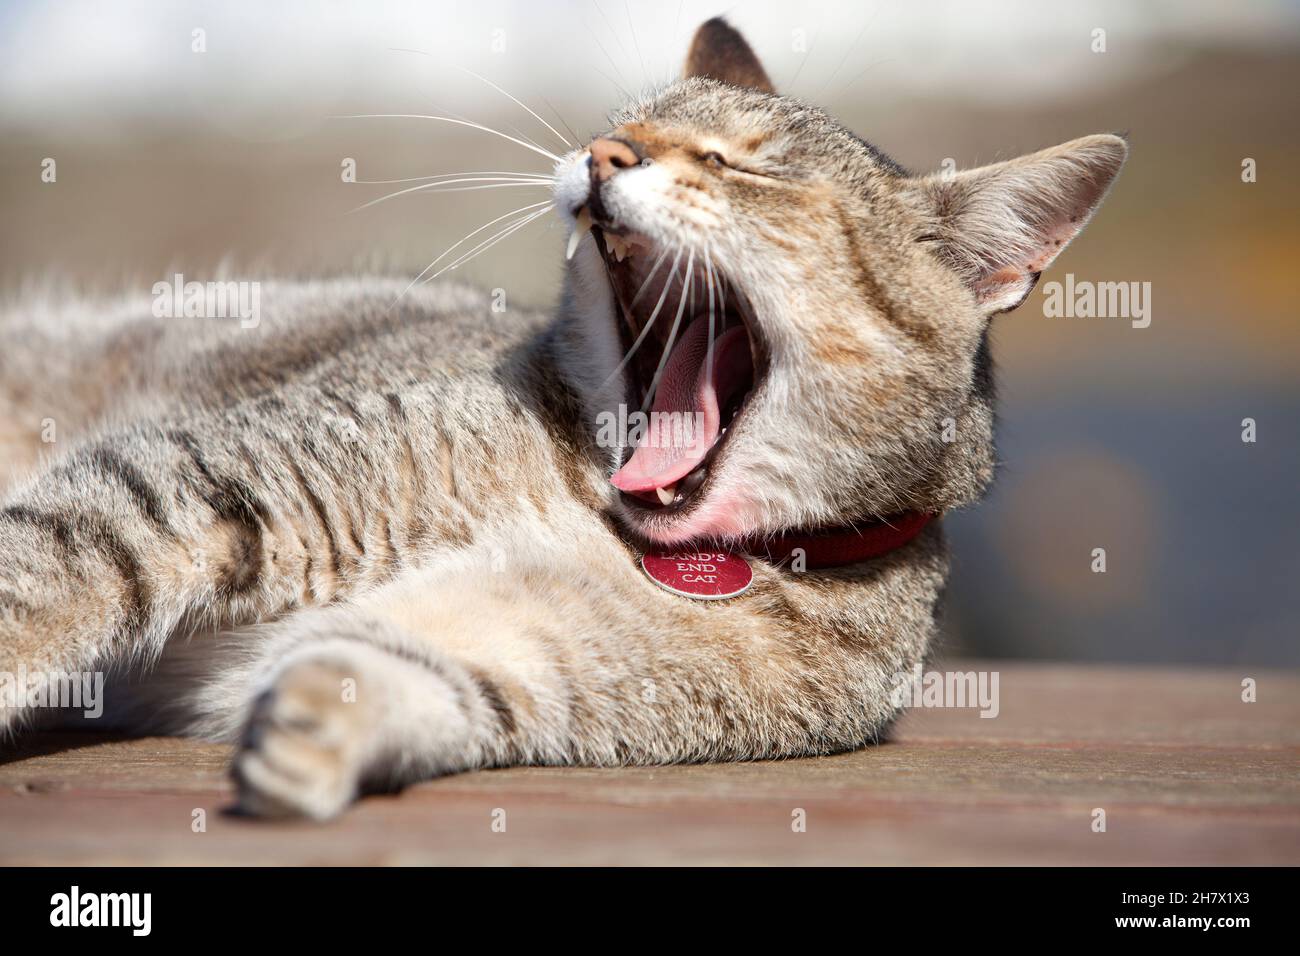 A tabby cat yawns while basking in the sunshine Stock Photo